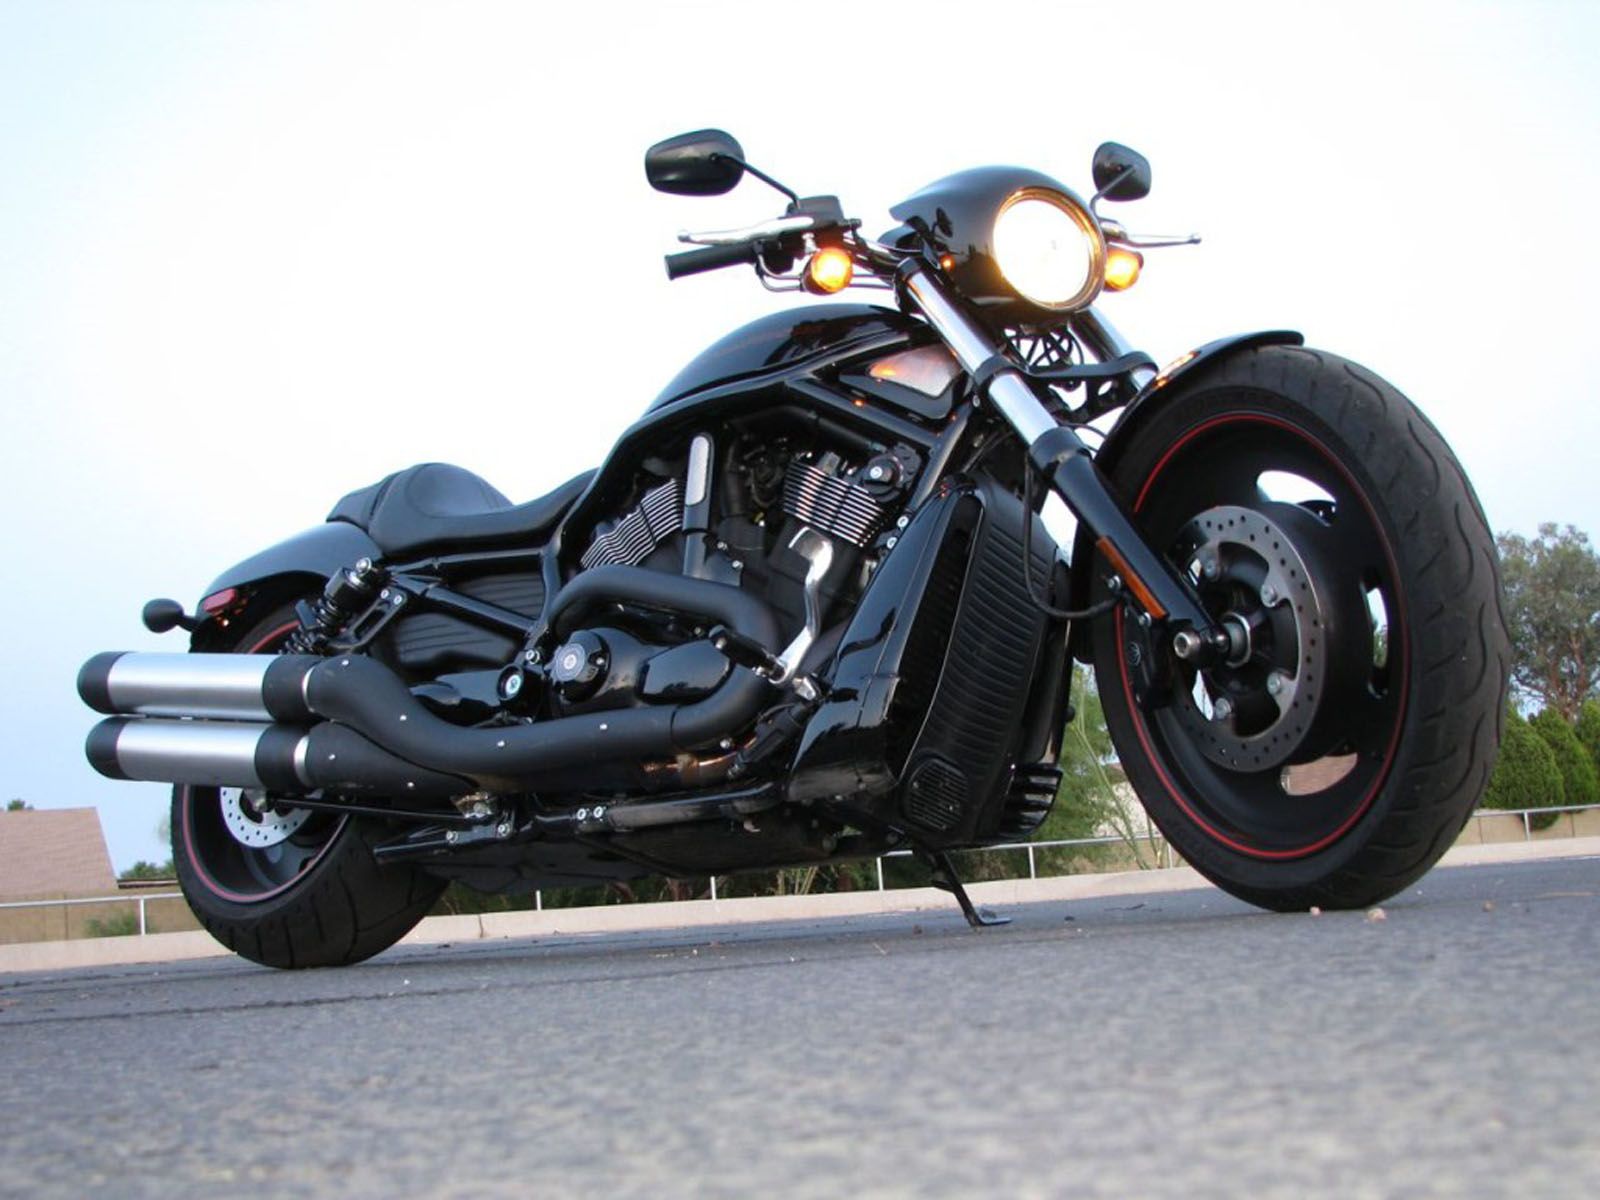 New Harley Davidson Bike Wallpapers Full HD Pictures